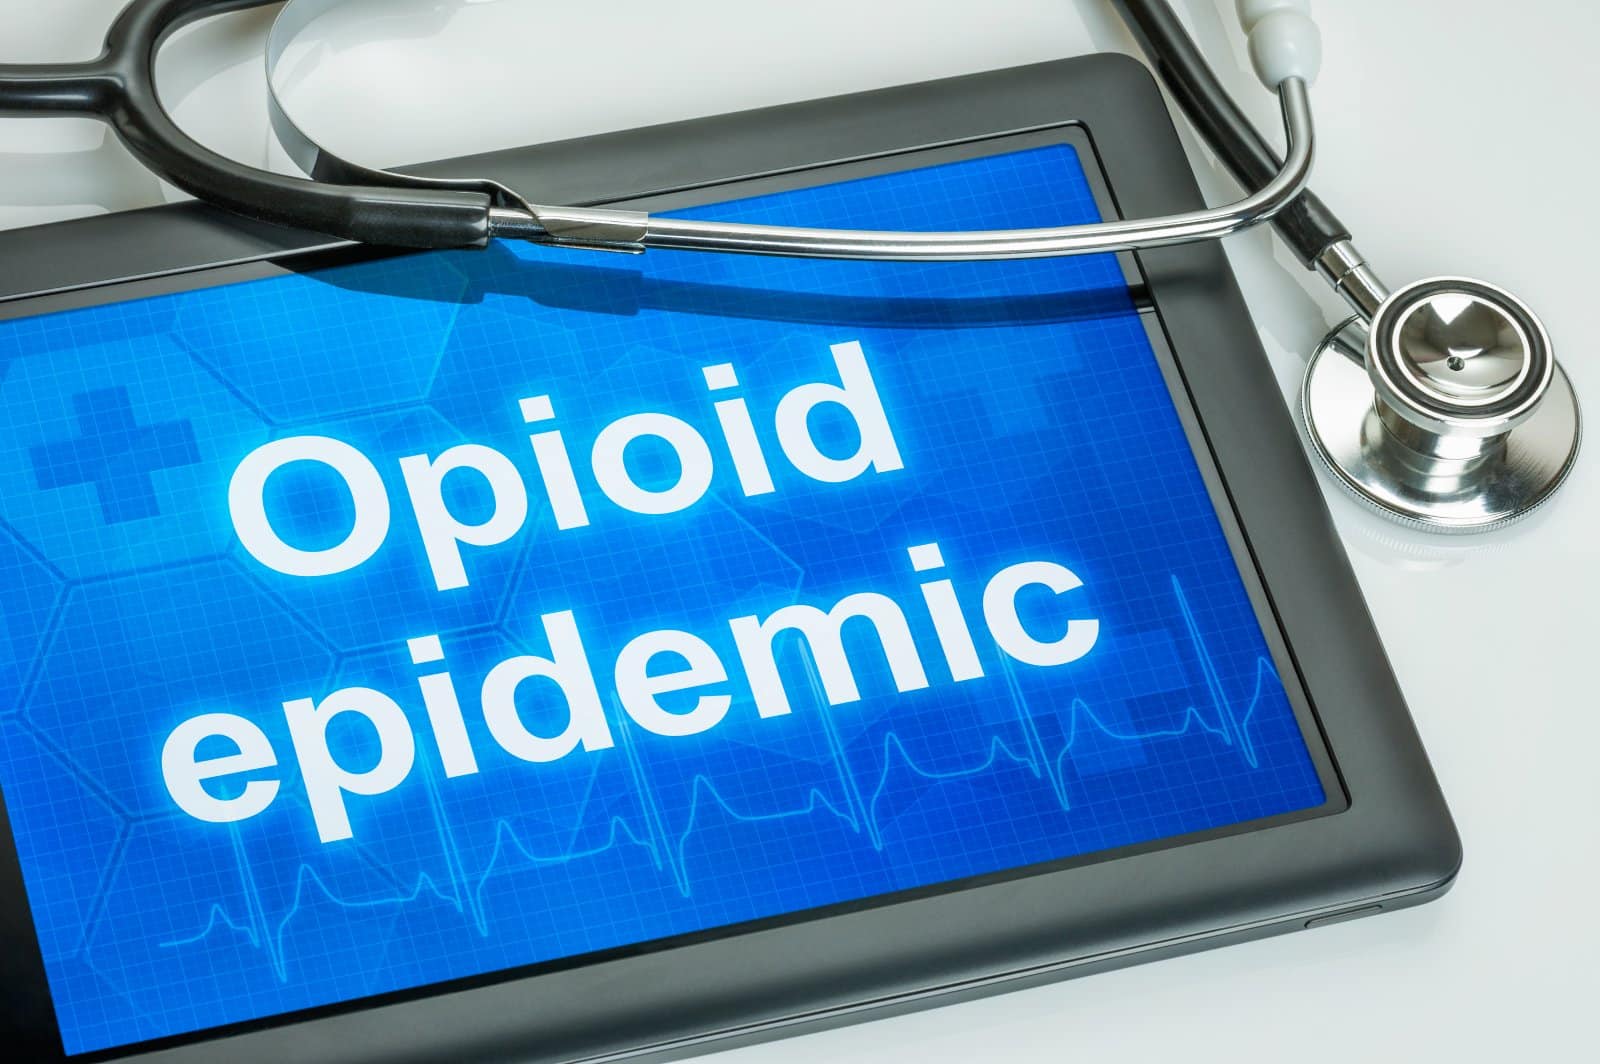 Image Credit: Shutterstock / Zerbor <p><span>The ongoing opioid crisis is a drain on healthcare resources and a tragedy for affected families. How will this crisis further strain the healthcare system?</span></p>